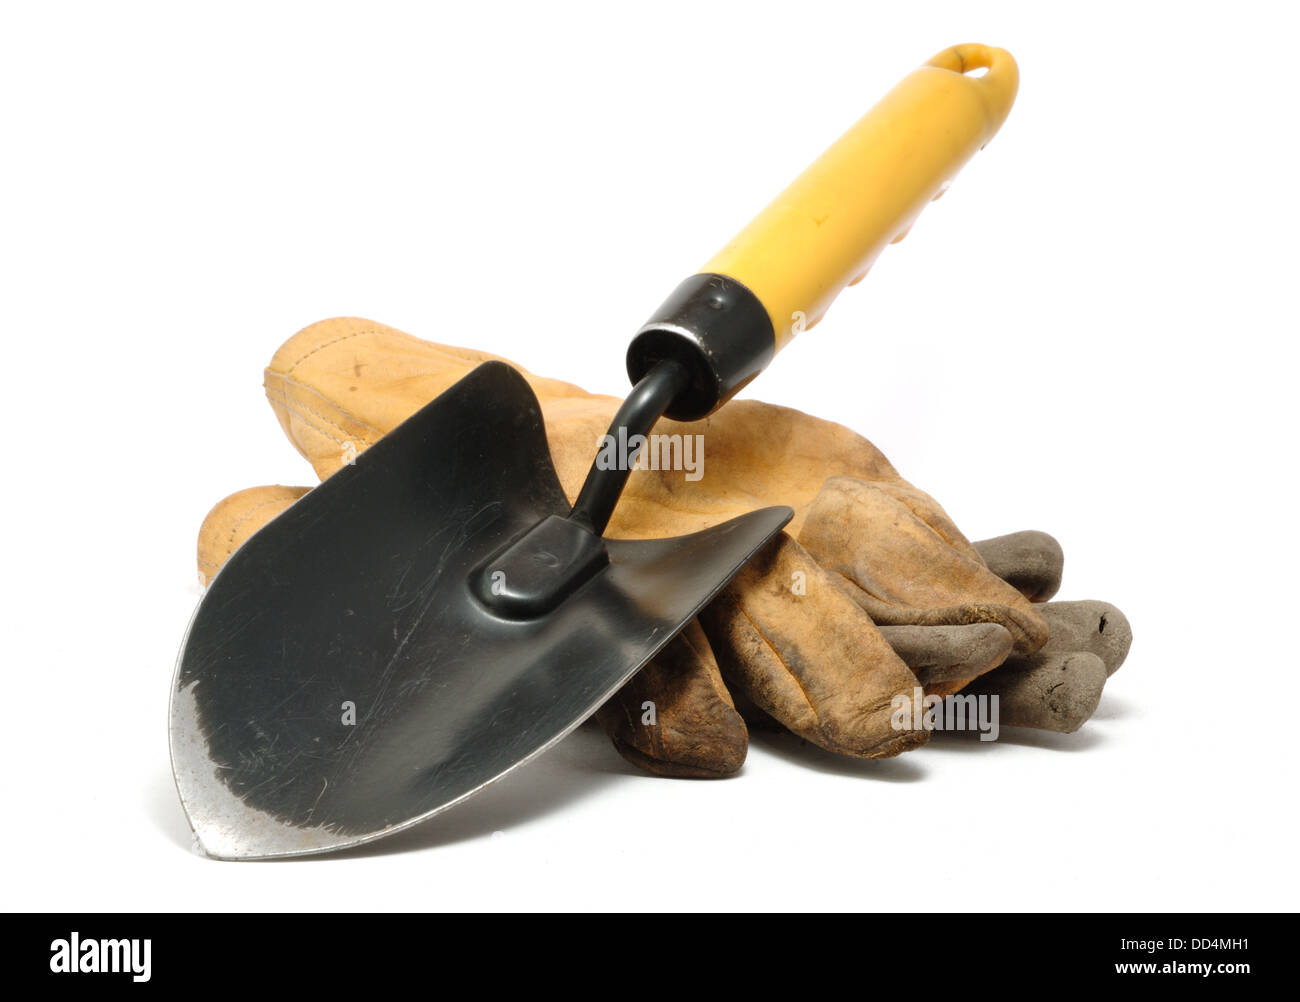 Old Dirty Leather Work Gloves and Trowel Isolated On White Stock Photo